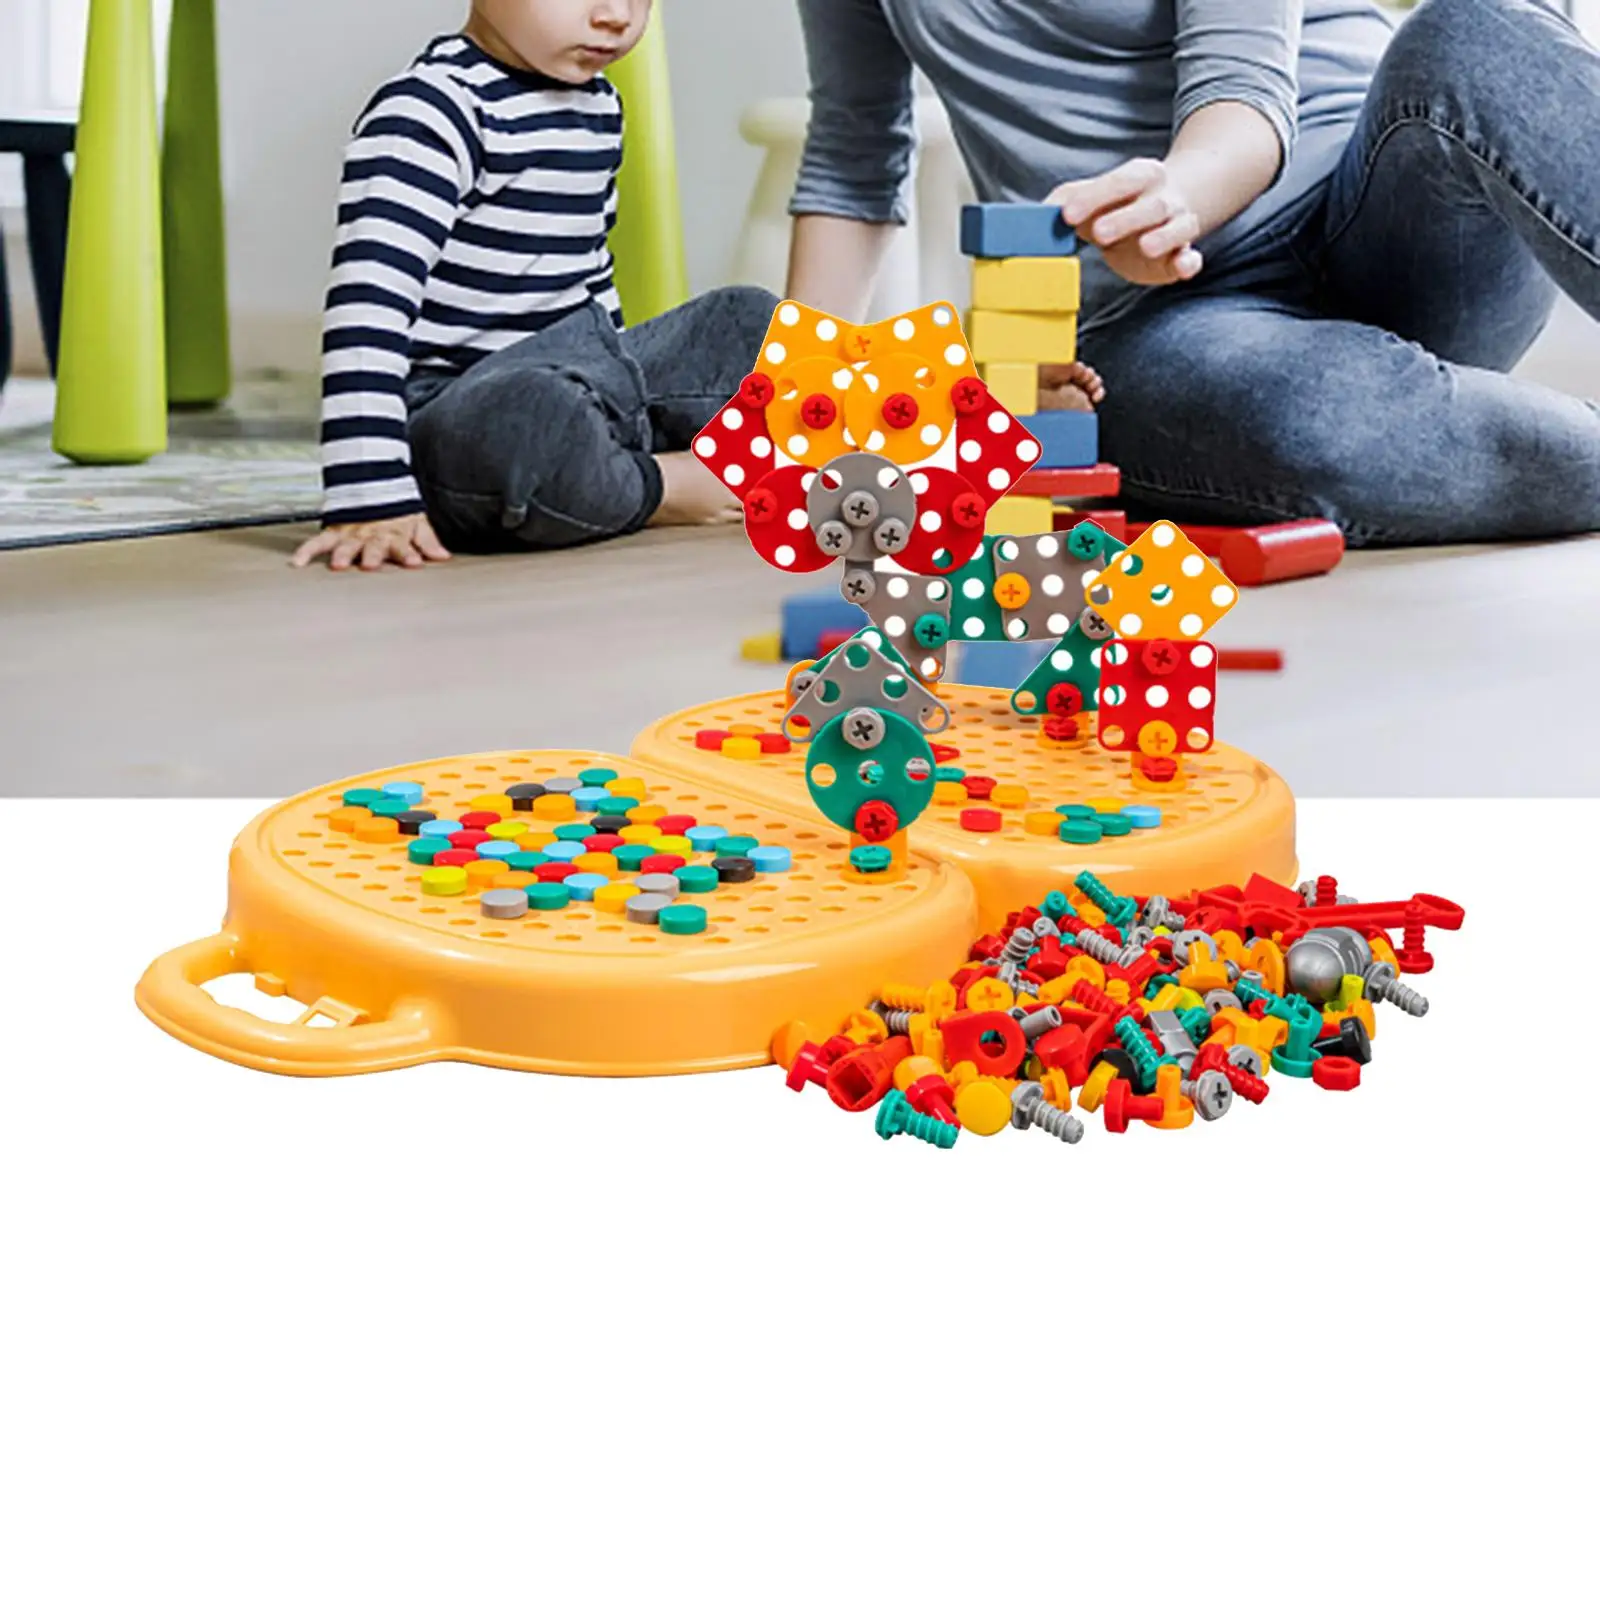 Simulation Building Toys Puzzle Toys Building Bricks Game Set Game Activities Center Construction Enginee for Children